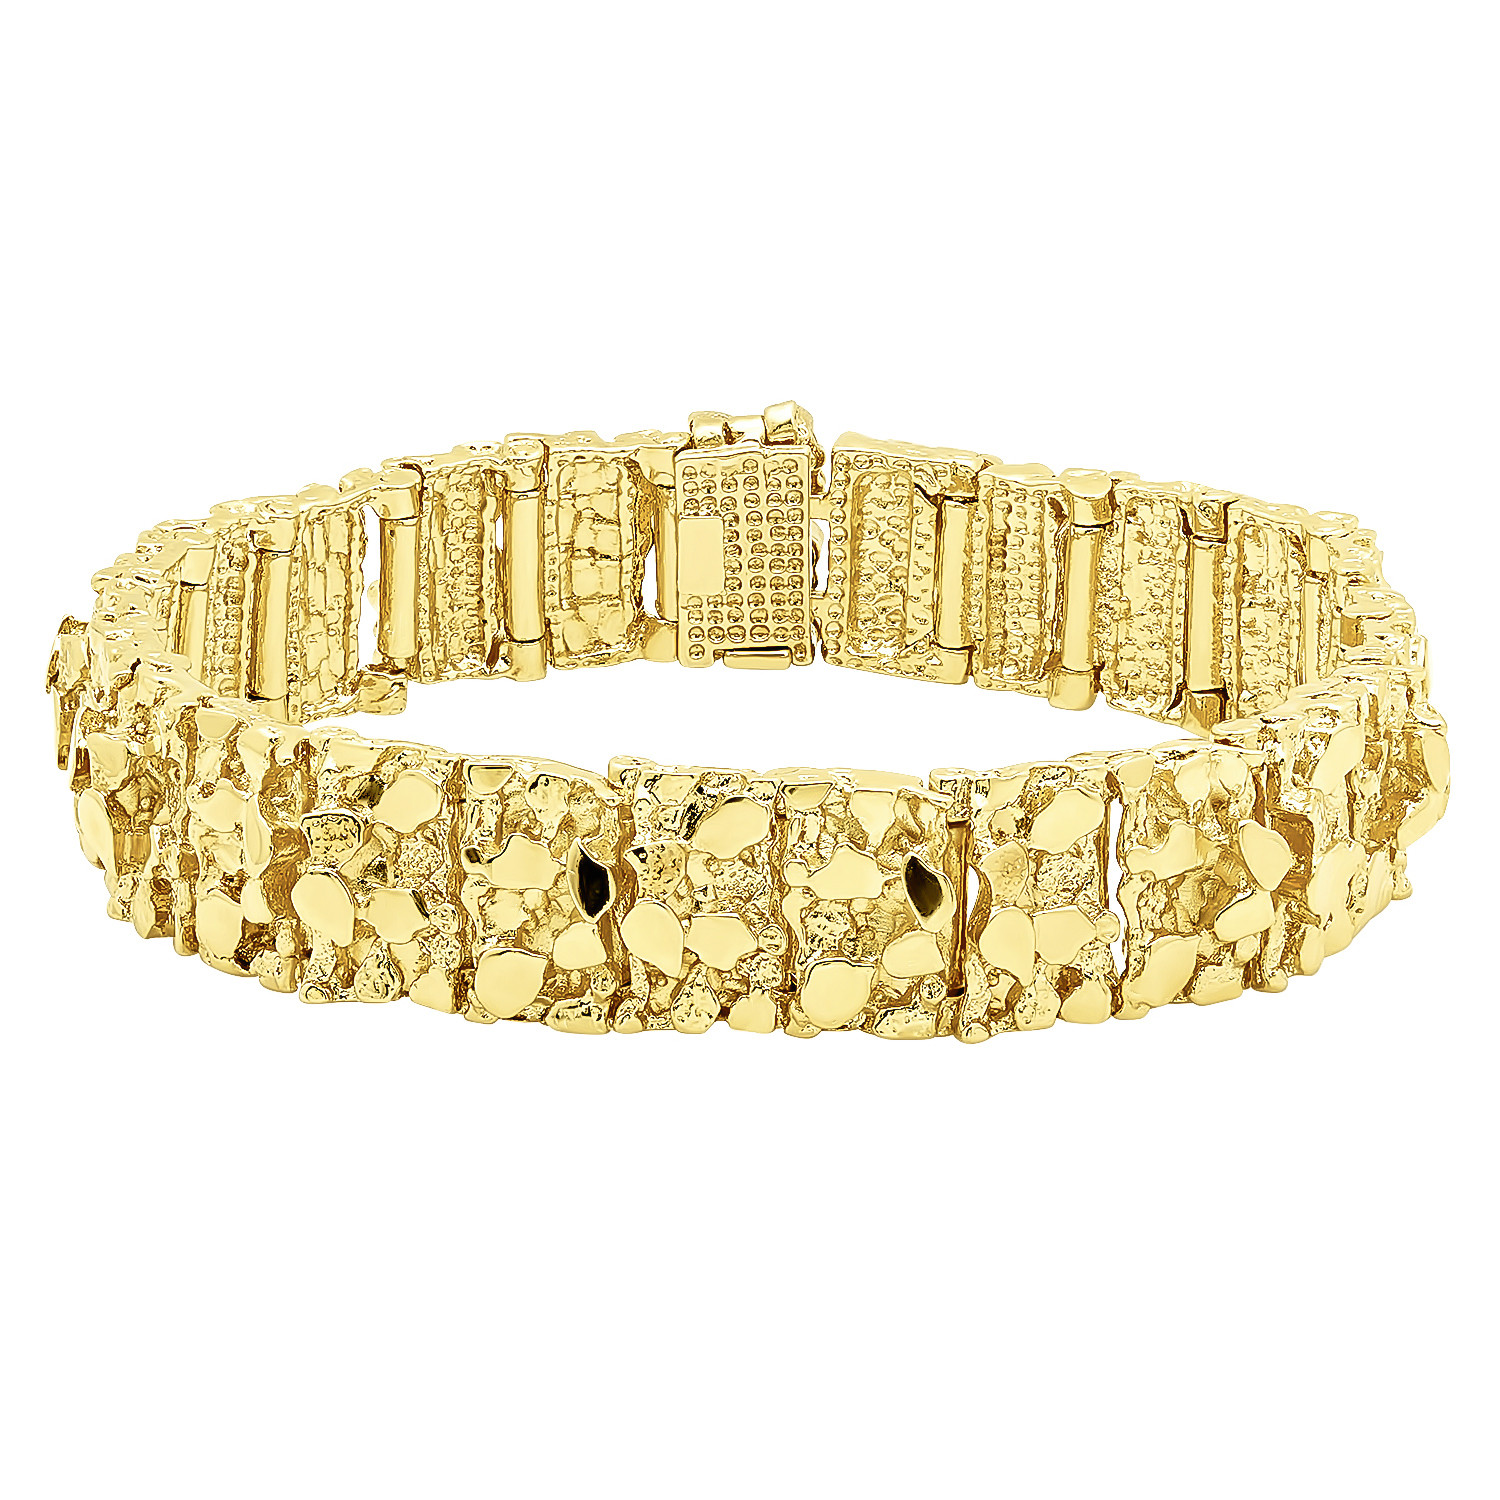 Gold Nugget Bracelet
 Mens Classic Fashion 14k Yellow Gold Plated Nug Half